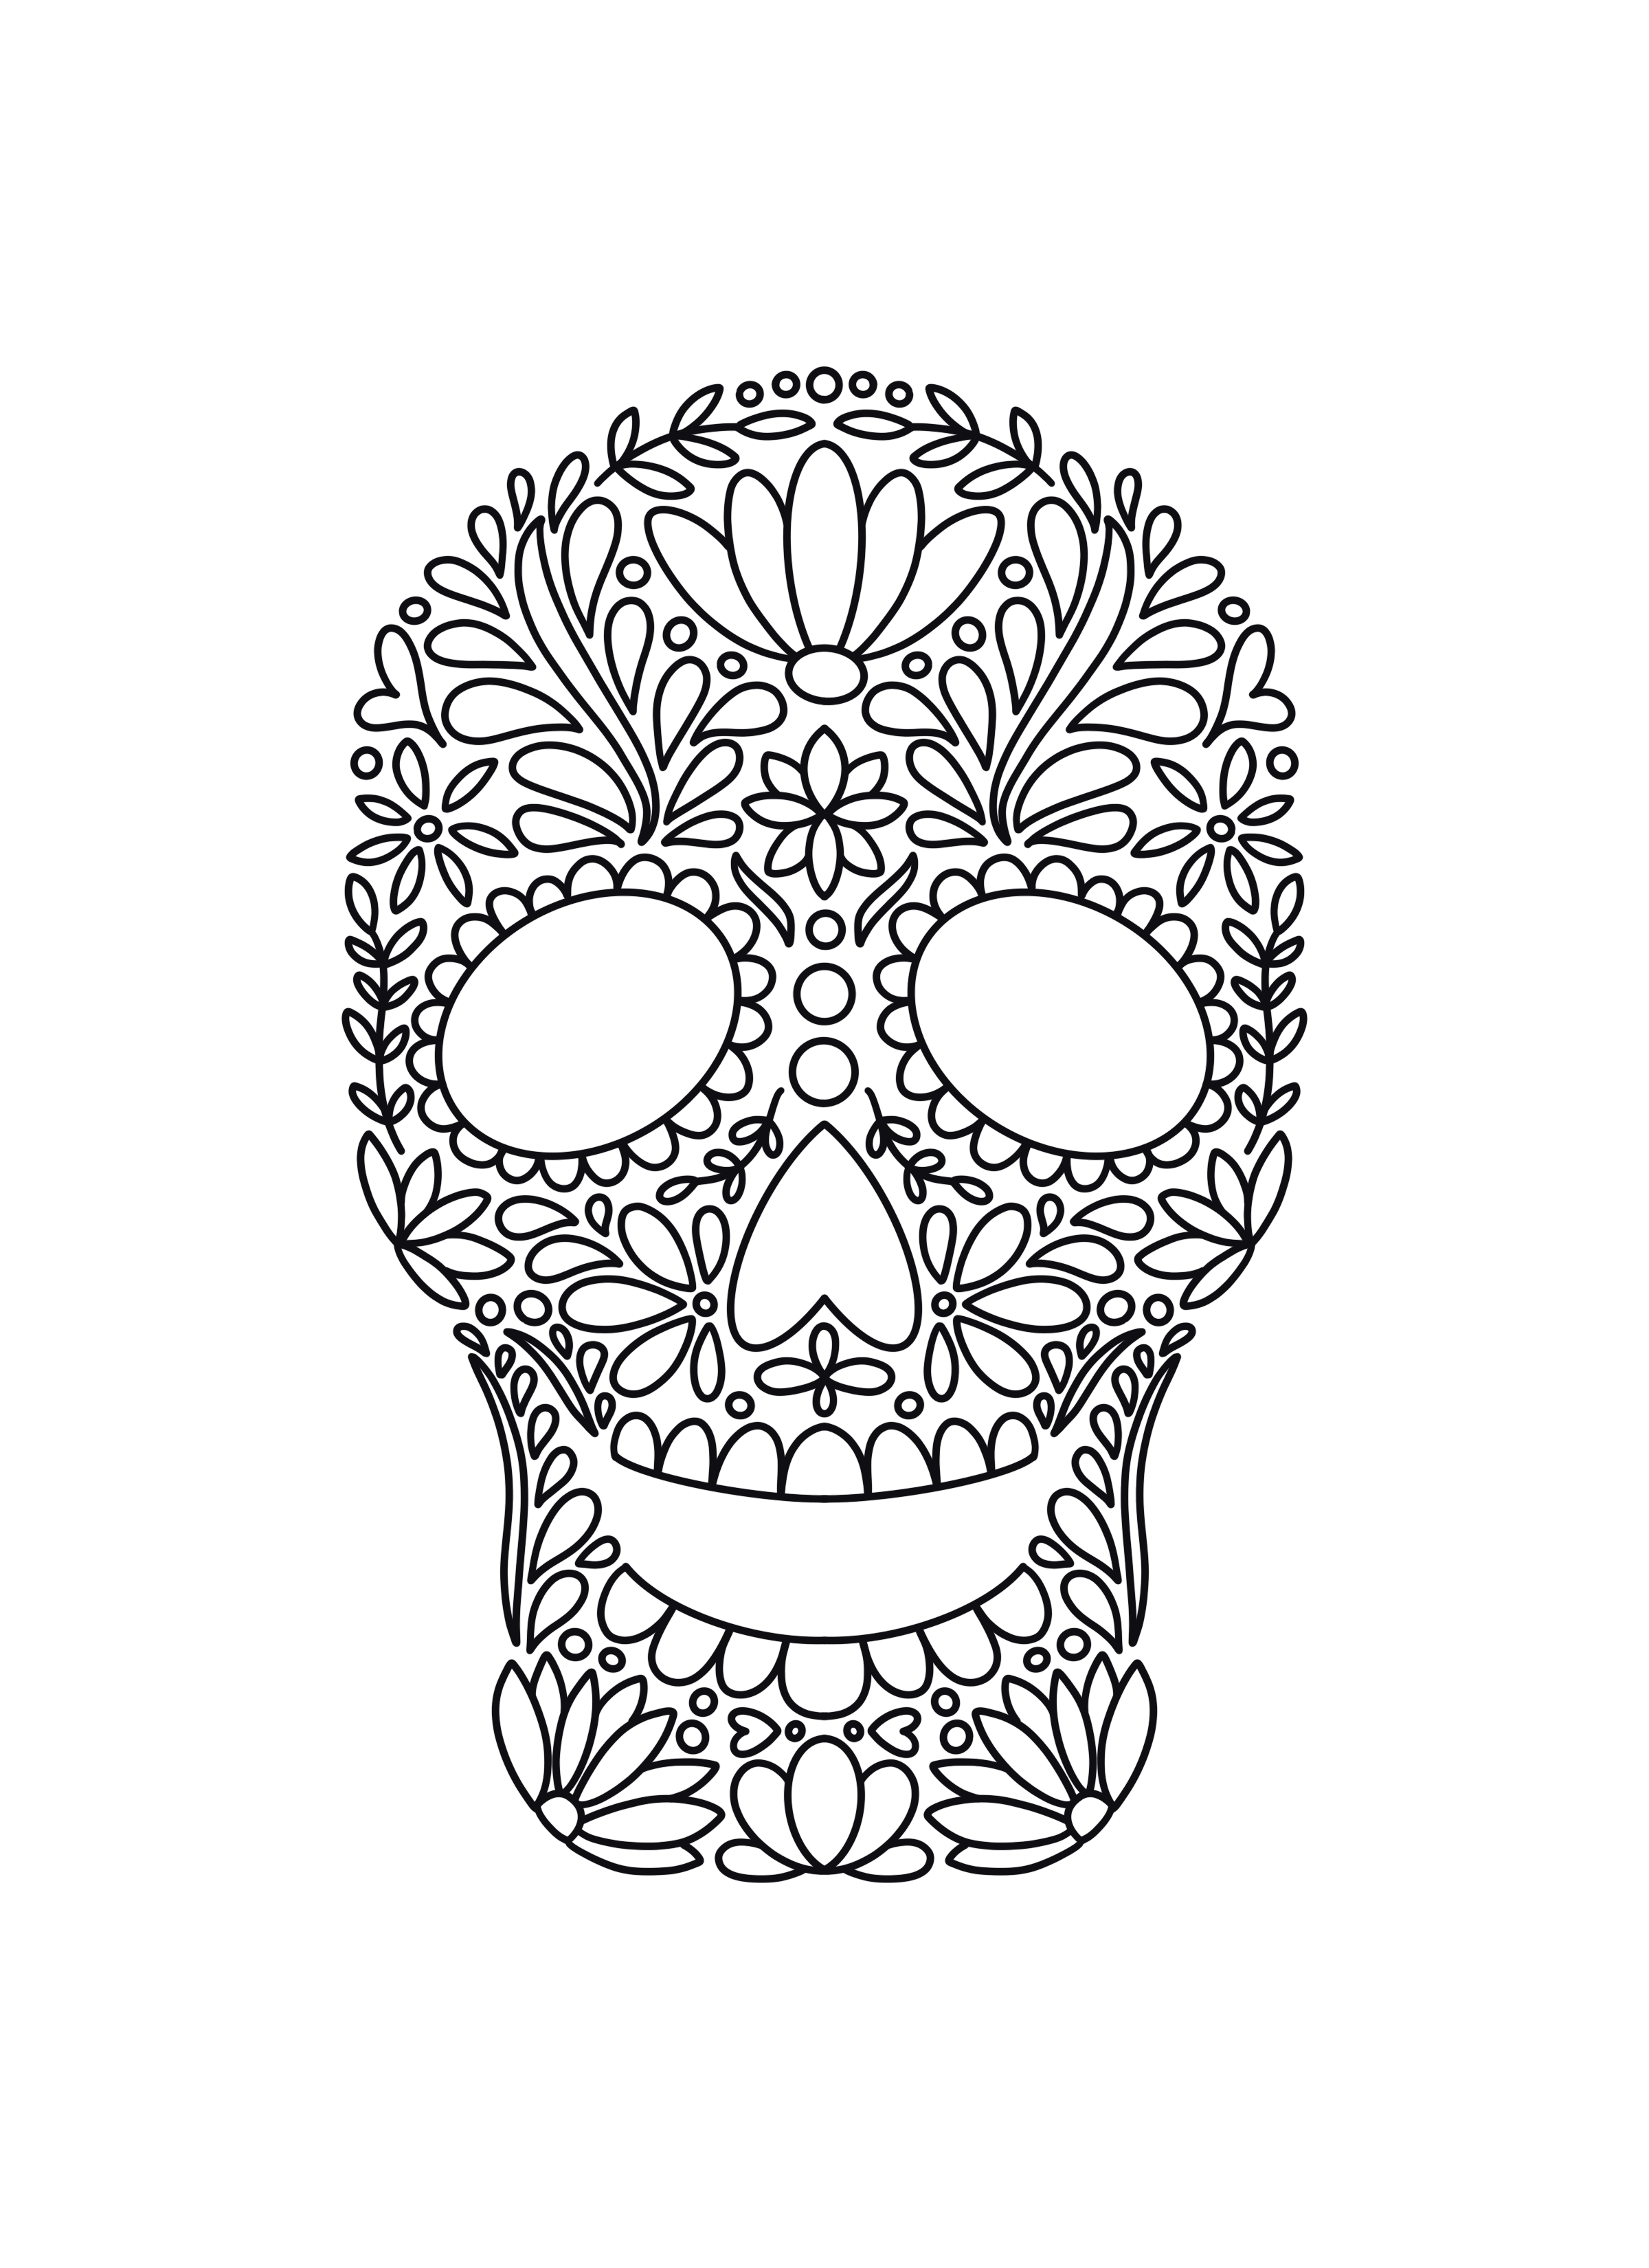 Sugar skull coloring page for day of the dead